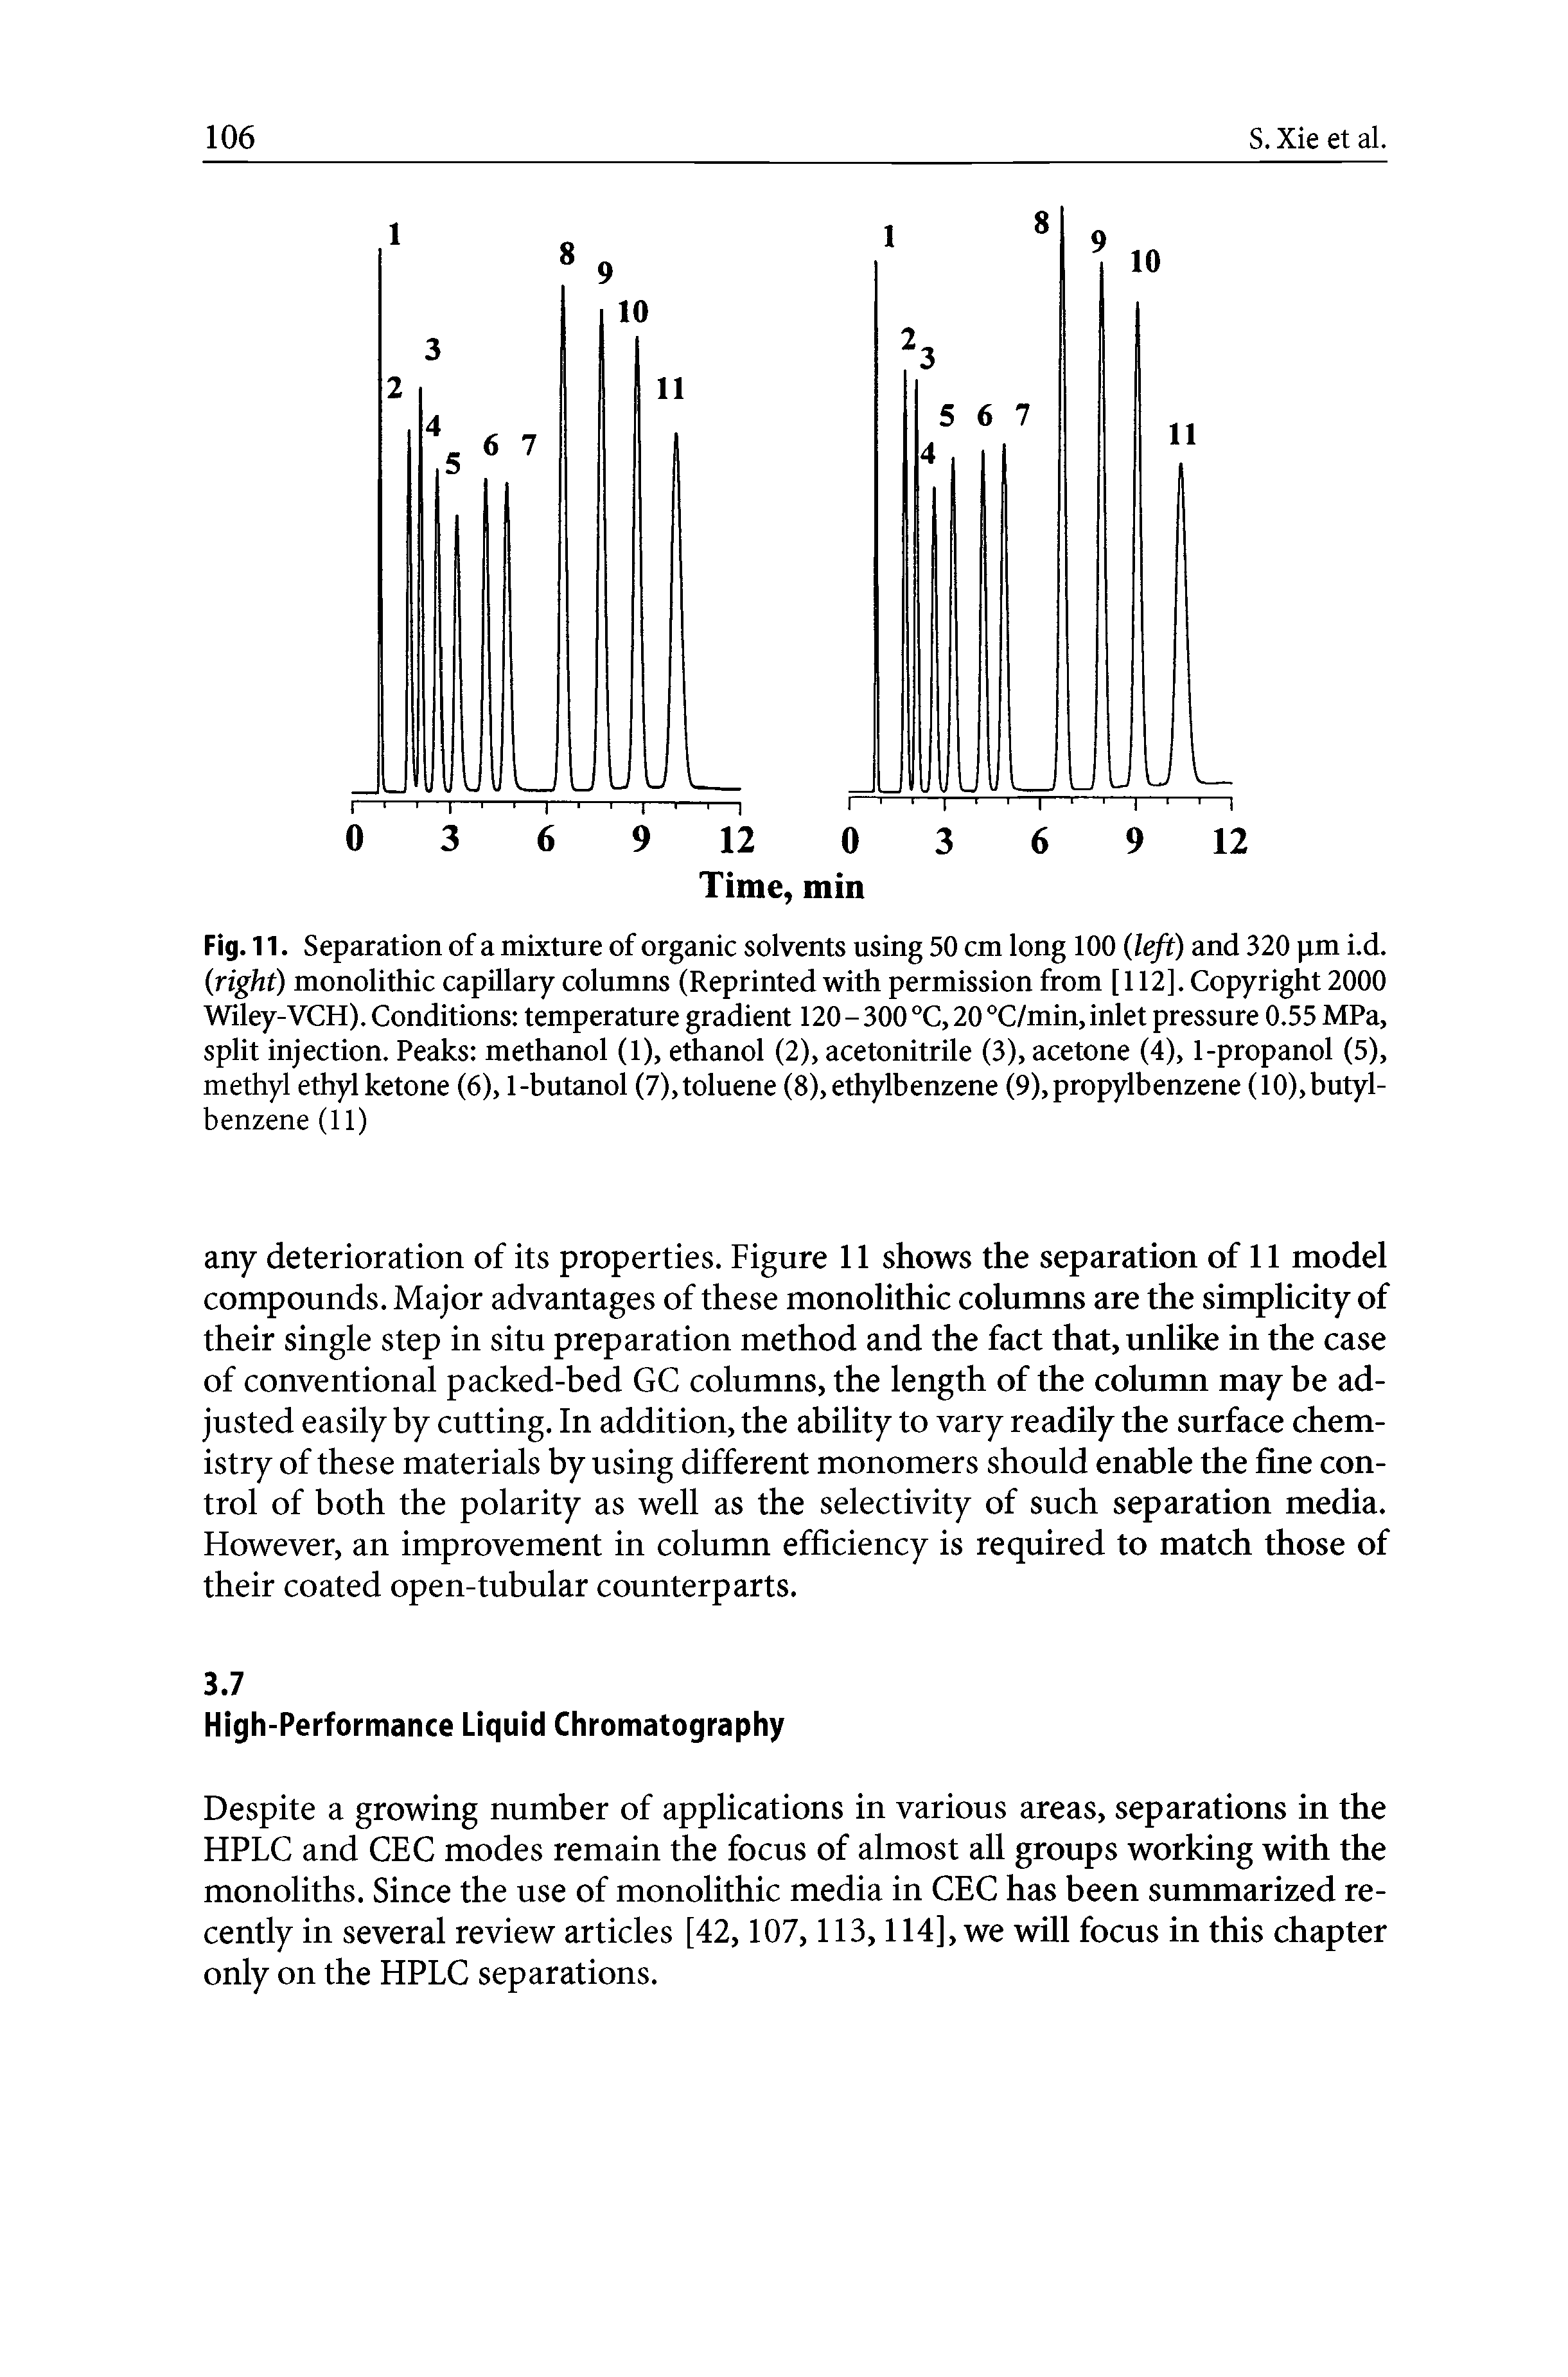 Fig. 11. Separation of a mixture of organic solvents using 50 cm long 100 (left) and 320 pm i.d. (right) monolithic capillary columns (Reprinted with permission from [112]. Copyright 2000 Wiley-VCH). Conditions temperature gradient 120 - 300 °C, 20 °C/min, inlet pressure 0.55 MPa, split injection. Peaks methanol (1), ethanol (2), acetonitrile (3), acetone (4), 1-propanol (5), methyl ethyl ketone (6), 1-butanol (7),toluene (8), ethylbenzene (9),propylbenzene (10),butyl-benzene (11)...